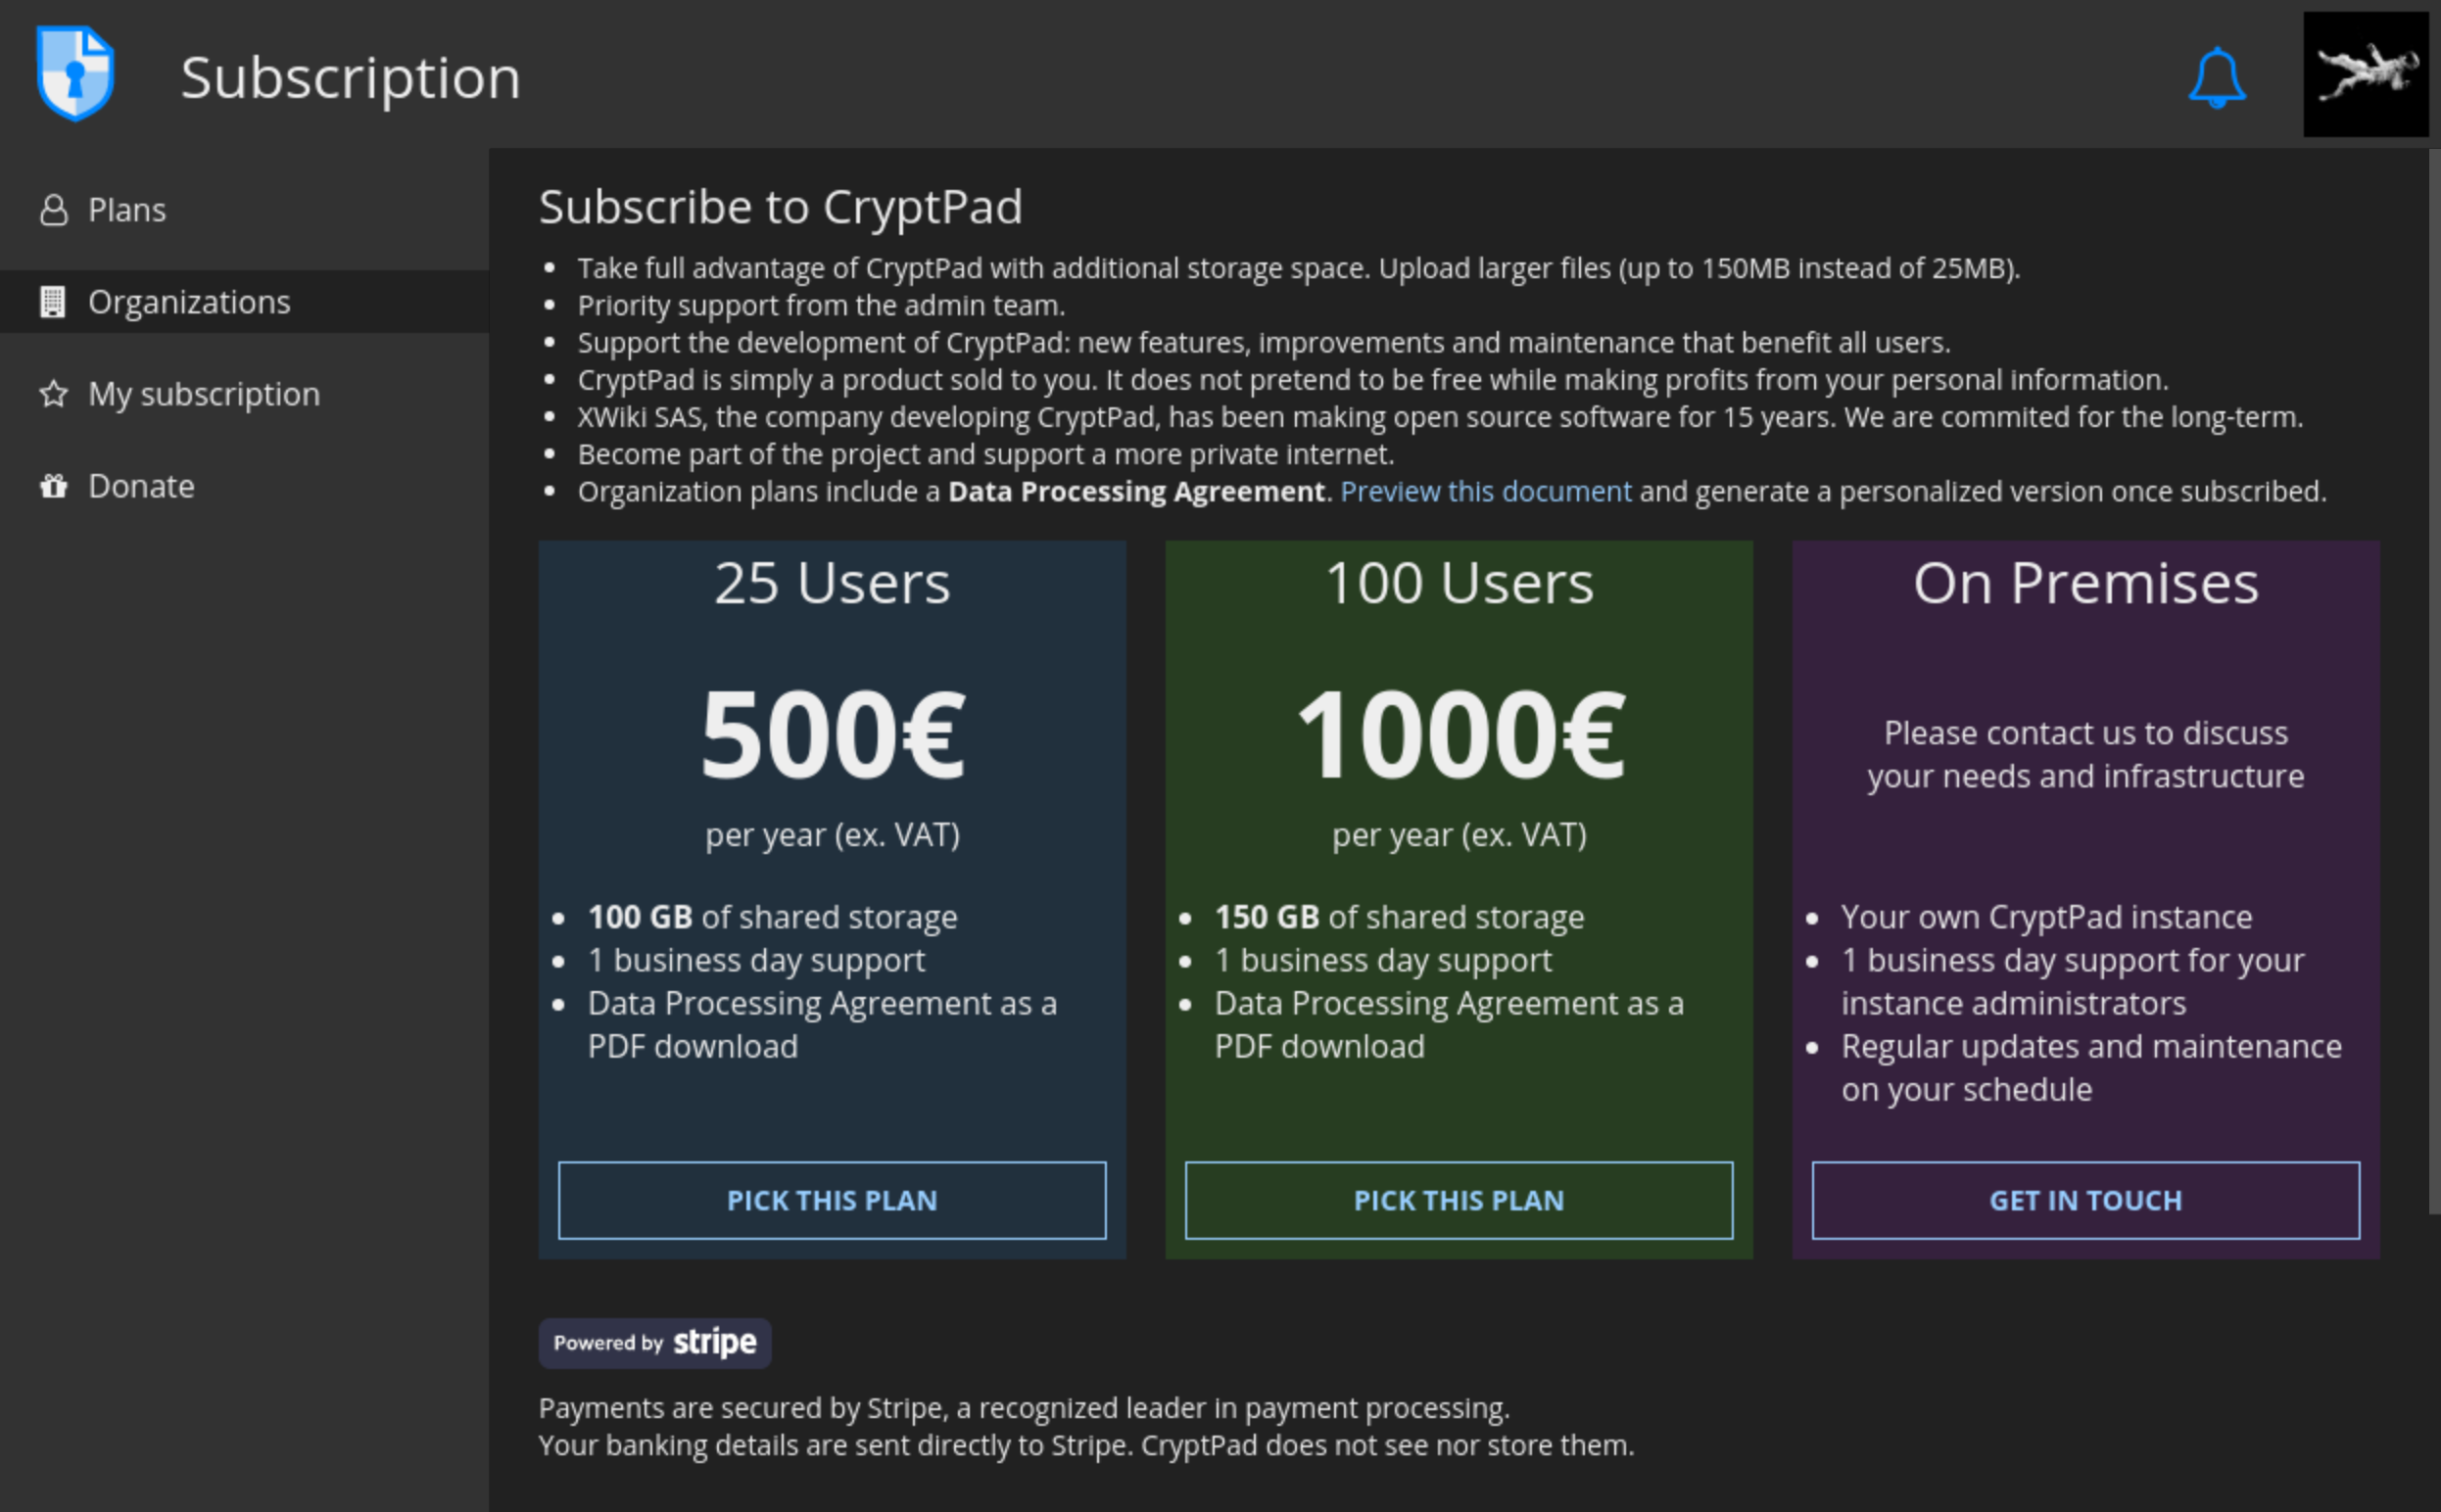 The new organization plans on cryptpad.fr in dark mode.